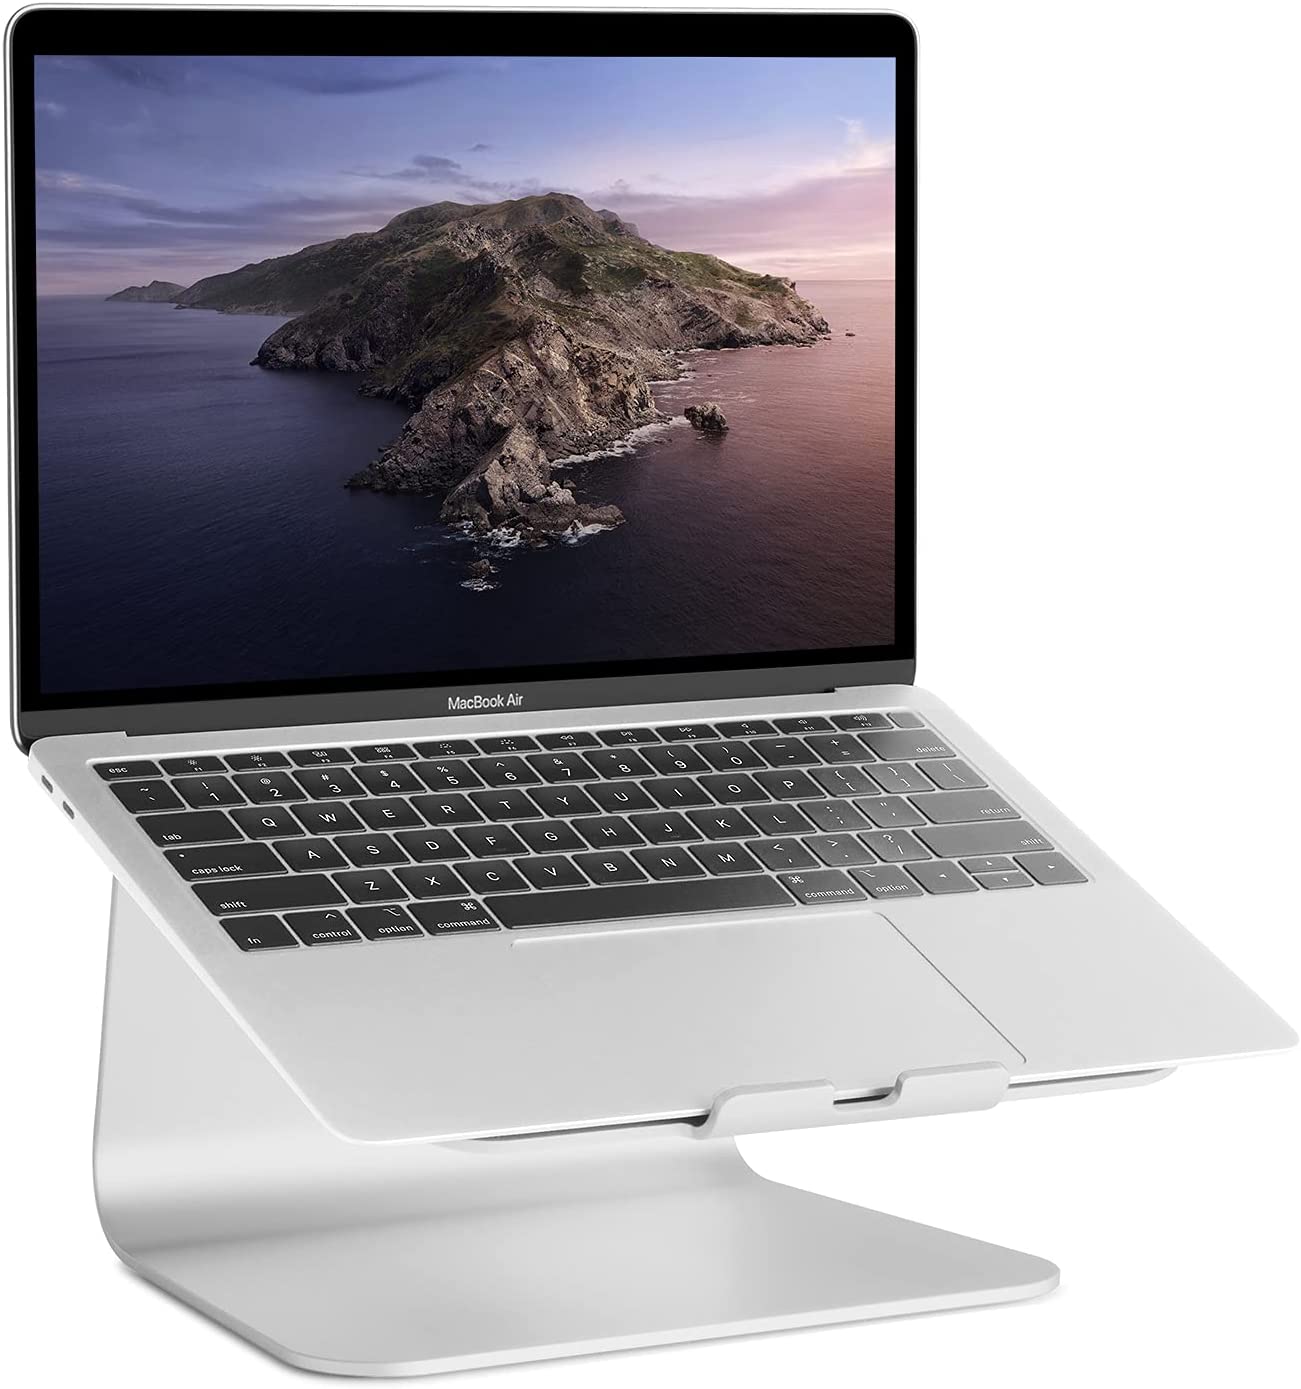 Laptop sitting on a stand with a screen of an island in the background, Rain Design mStand